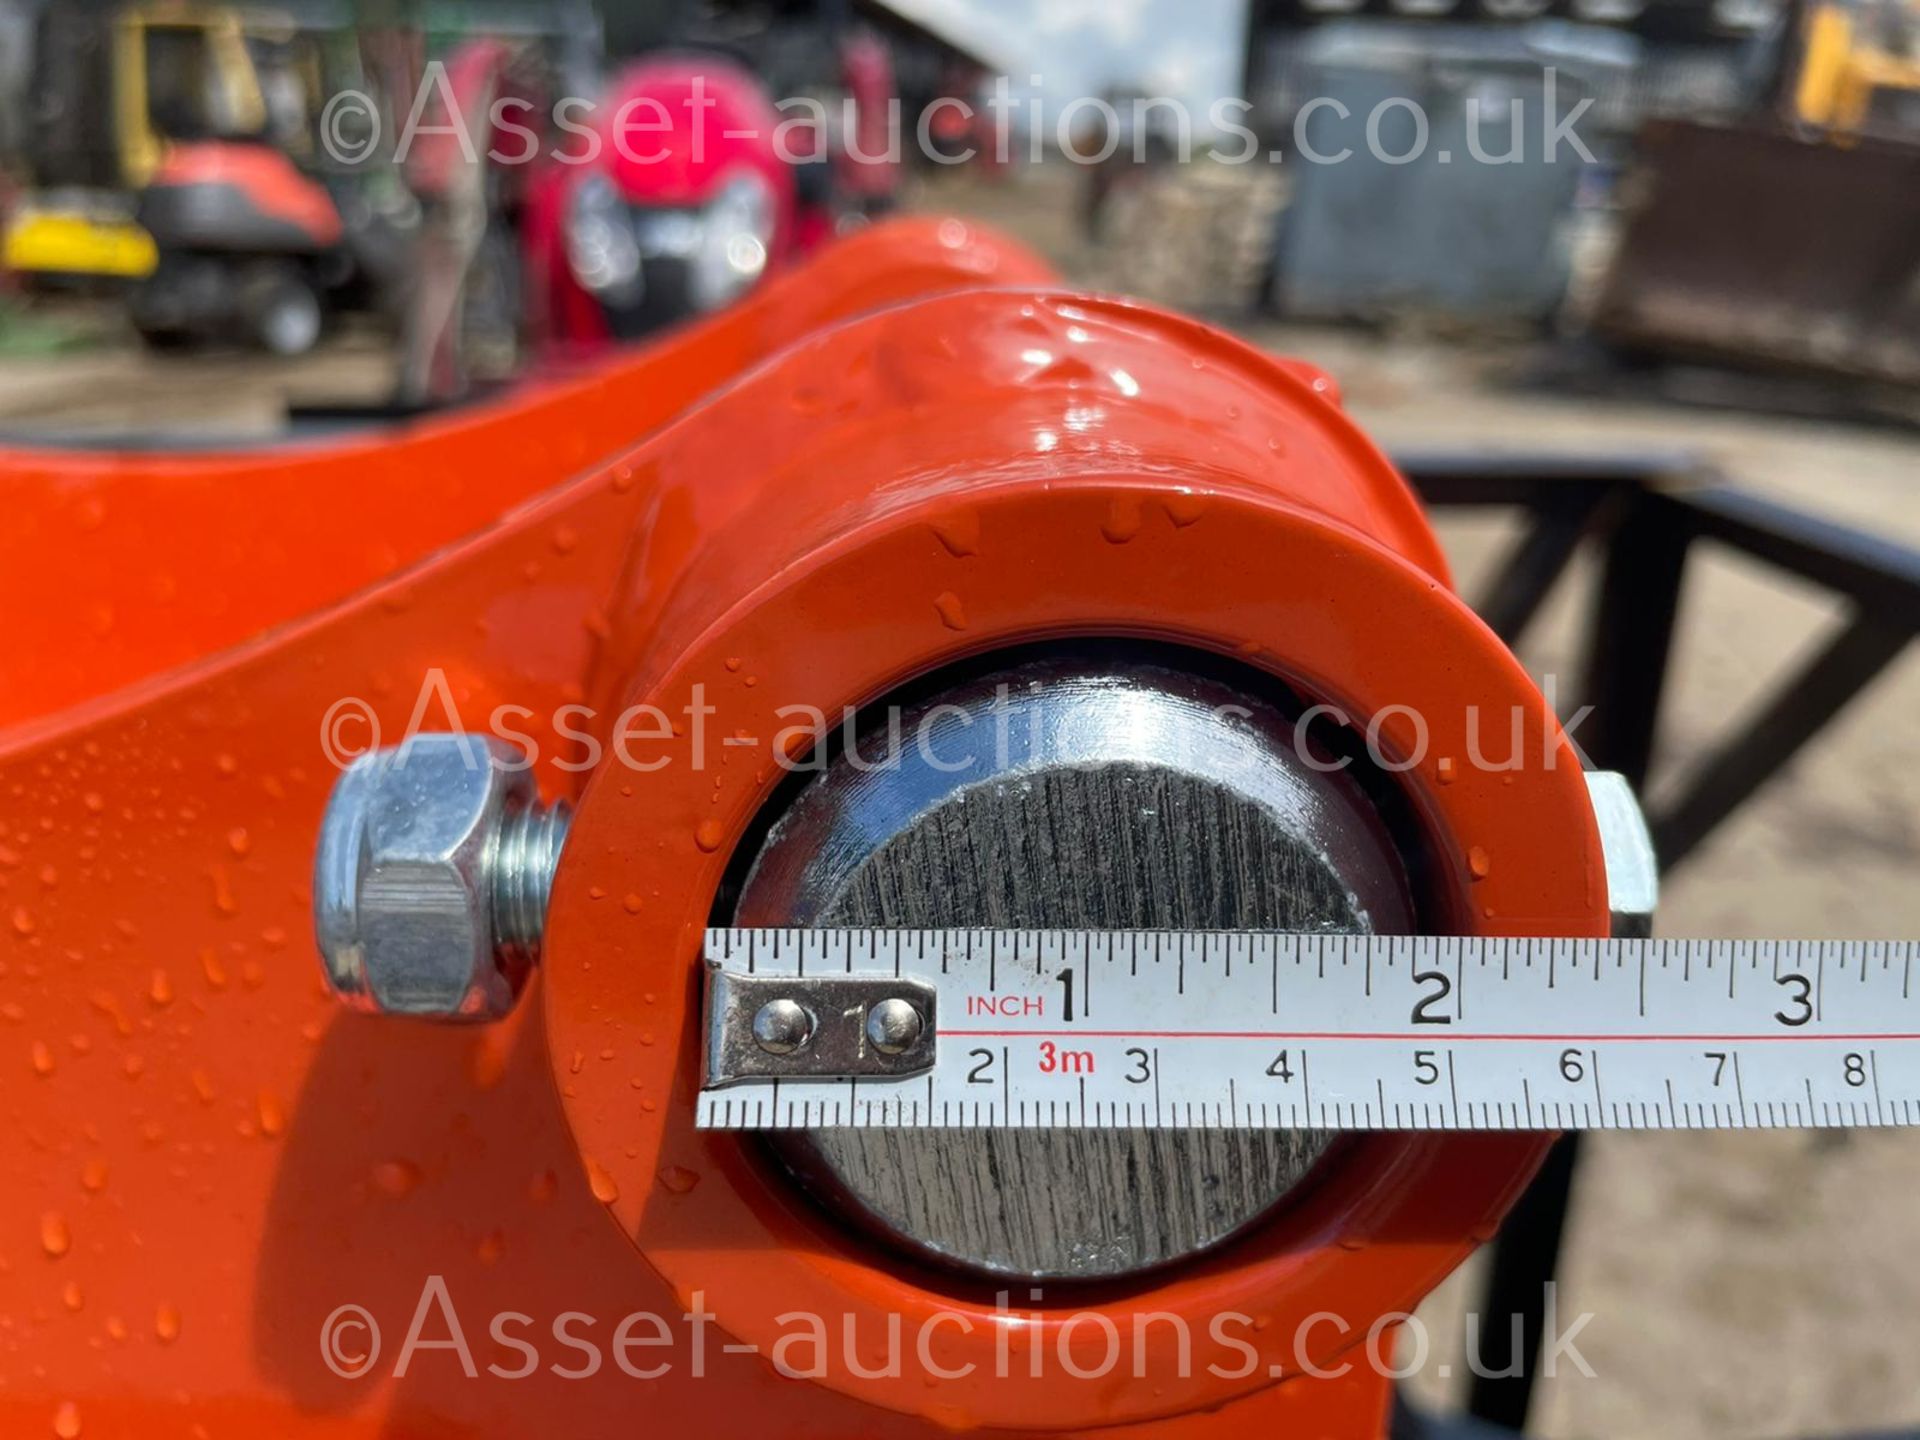 NEW AND UNUSED HEAVY DUTY 18" STUMP GRINDER, HYDRAULIC DRIVEN, 50mm PINS *PLUS VAT* - Image 13 of 16